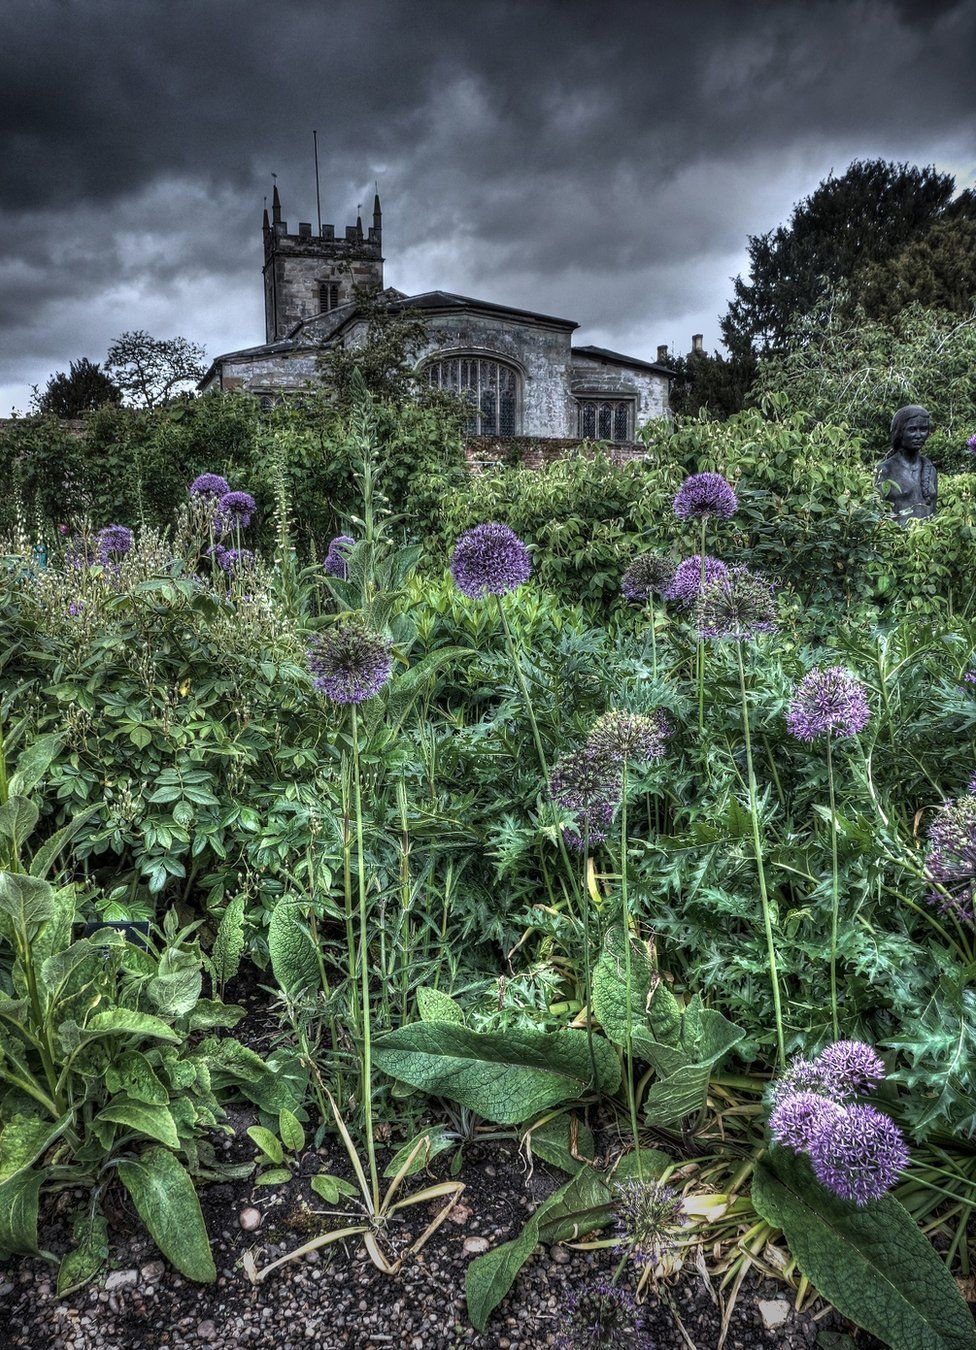 Wild flowers and weeds with a church in the background